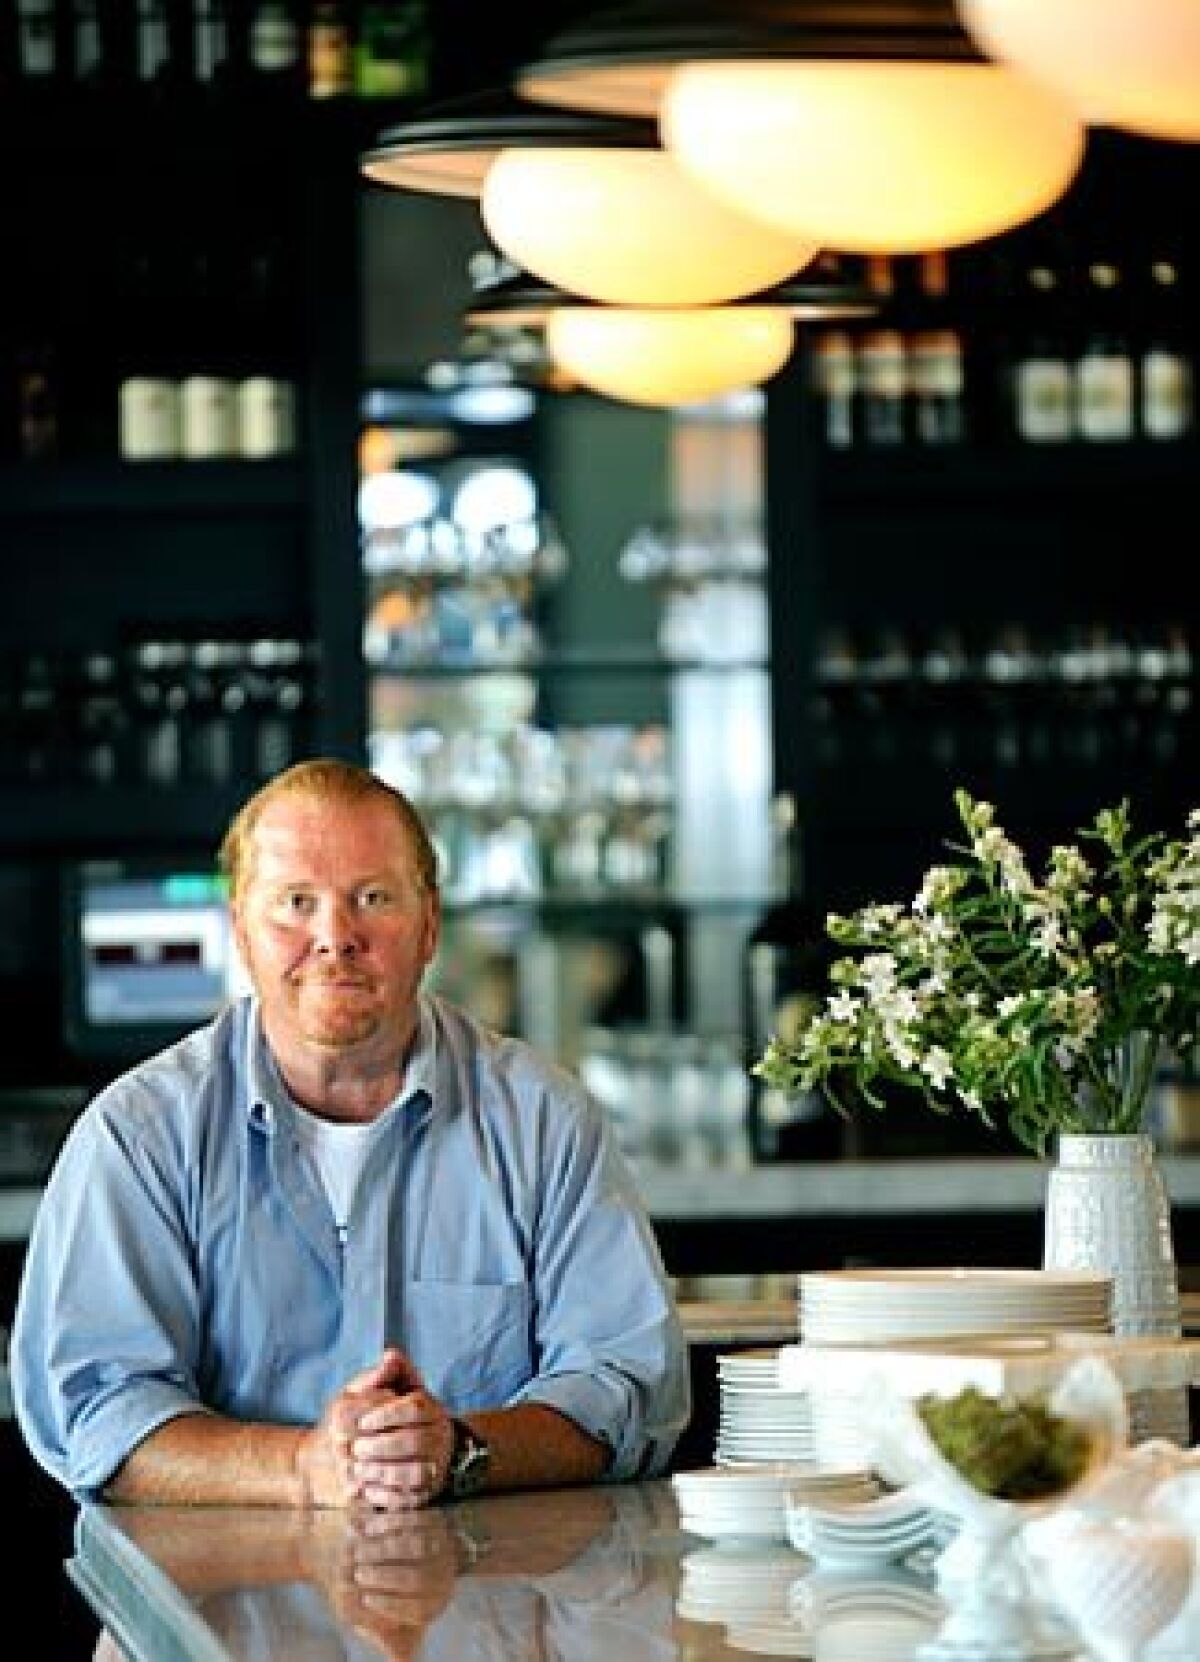 Although no plans have been finalized yet, a Pizzeria Mozza may be coming to Orange County, says Mario Batali.